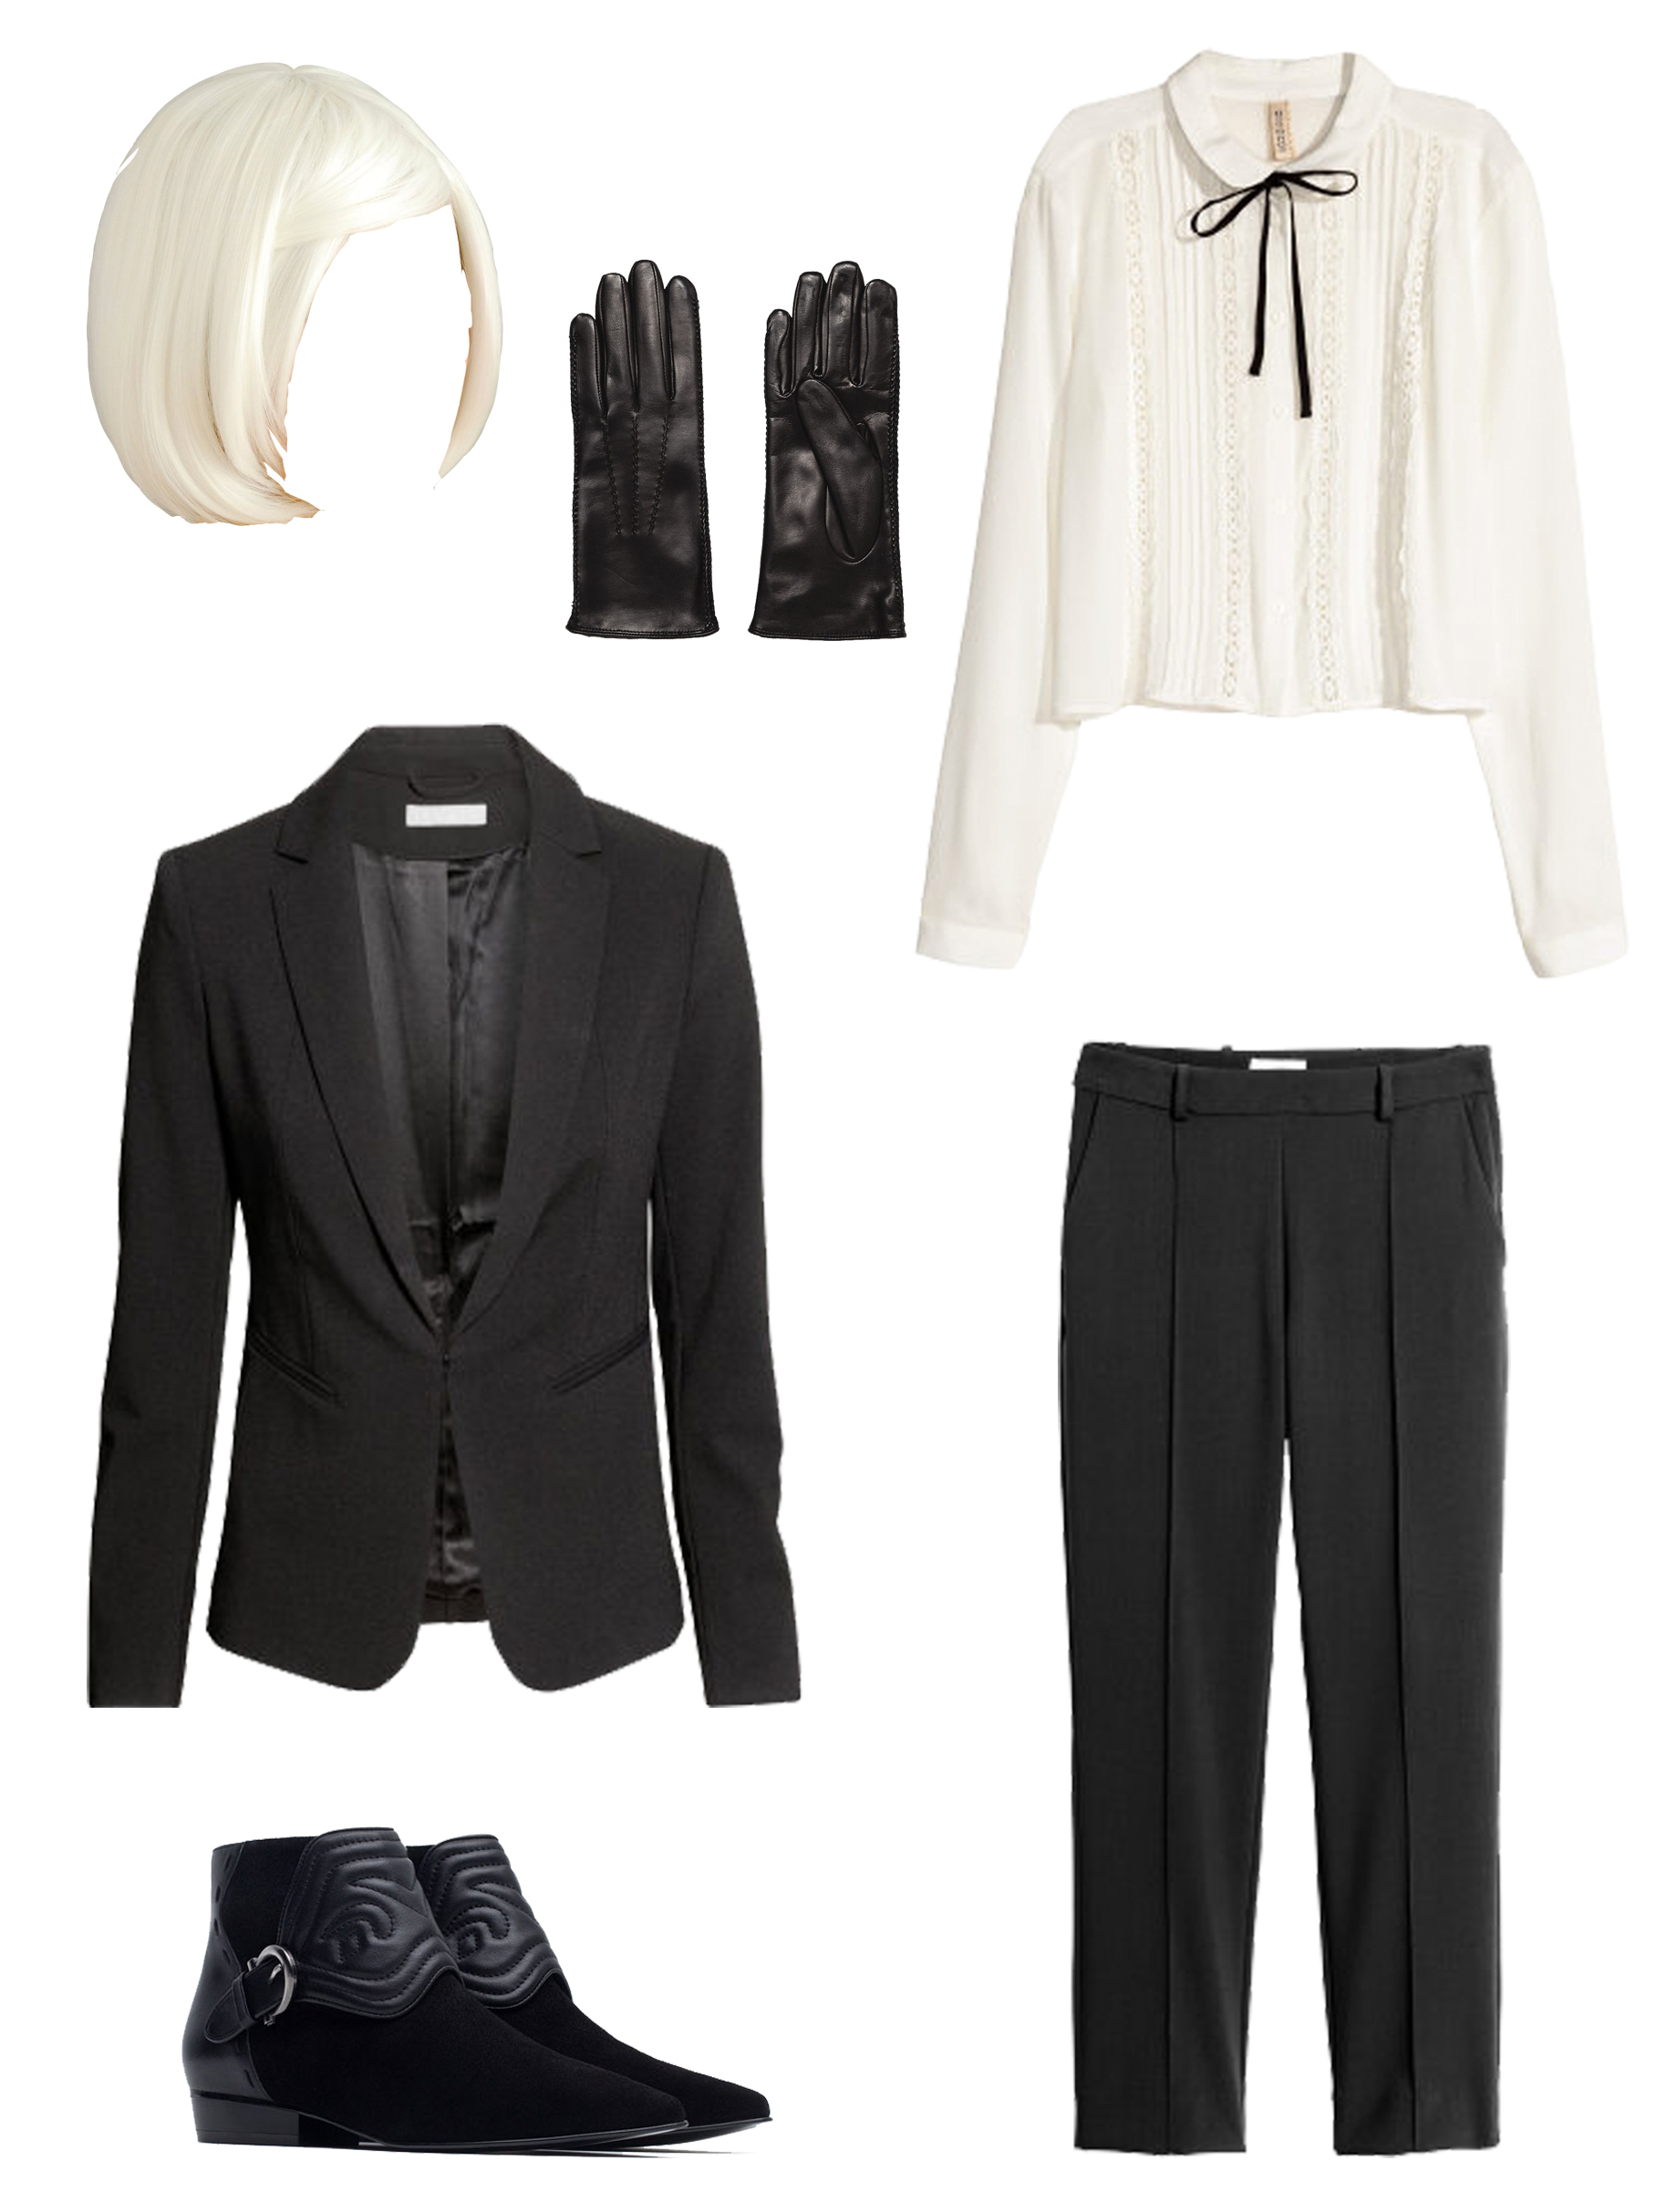 Wig from Aliexpress, Sunglasses from Topshop, White Blouse, Blazer & Pants from H&M, Gloves and Boots from Zara